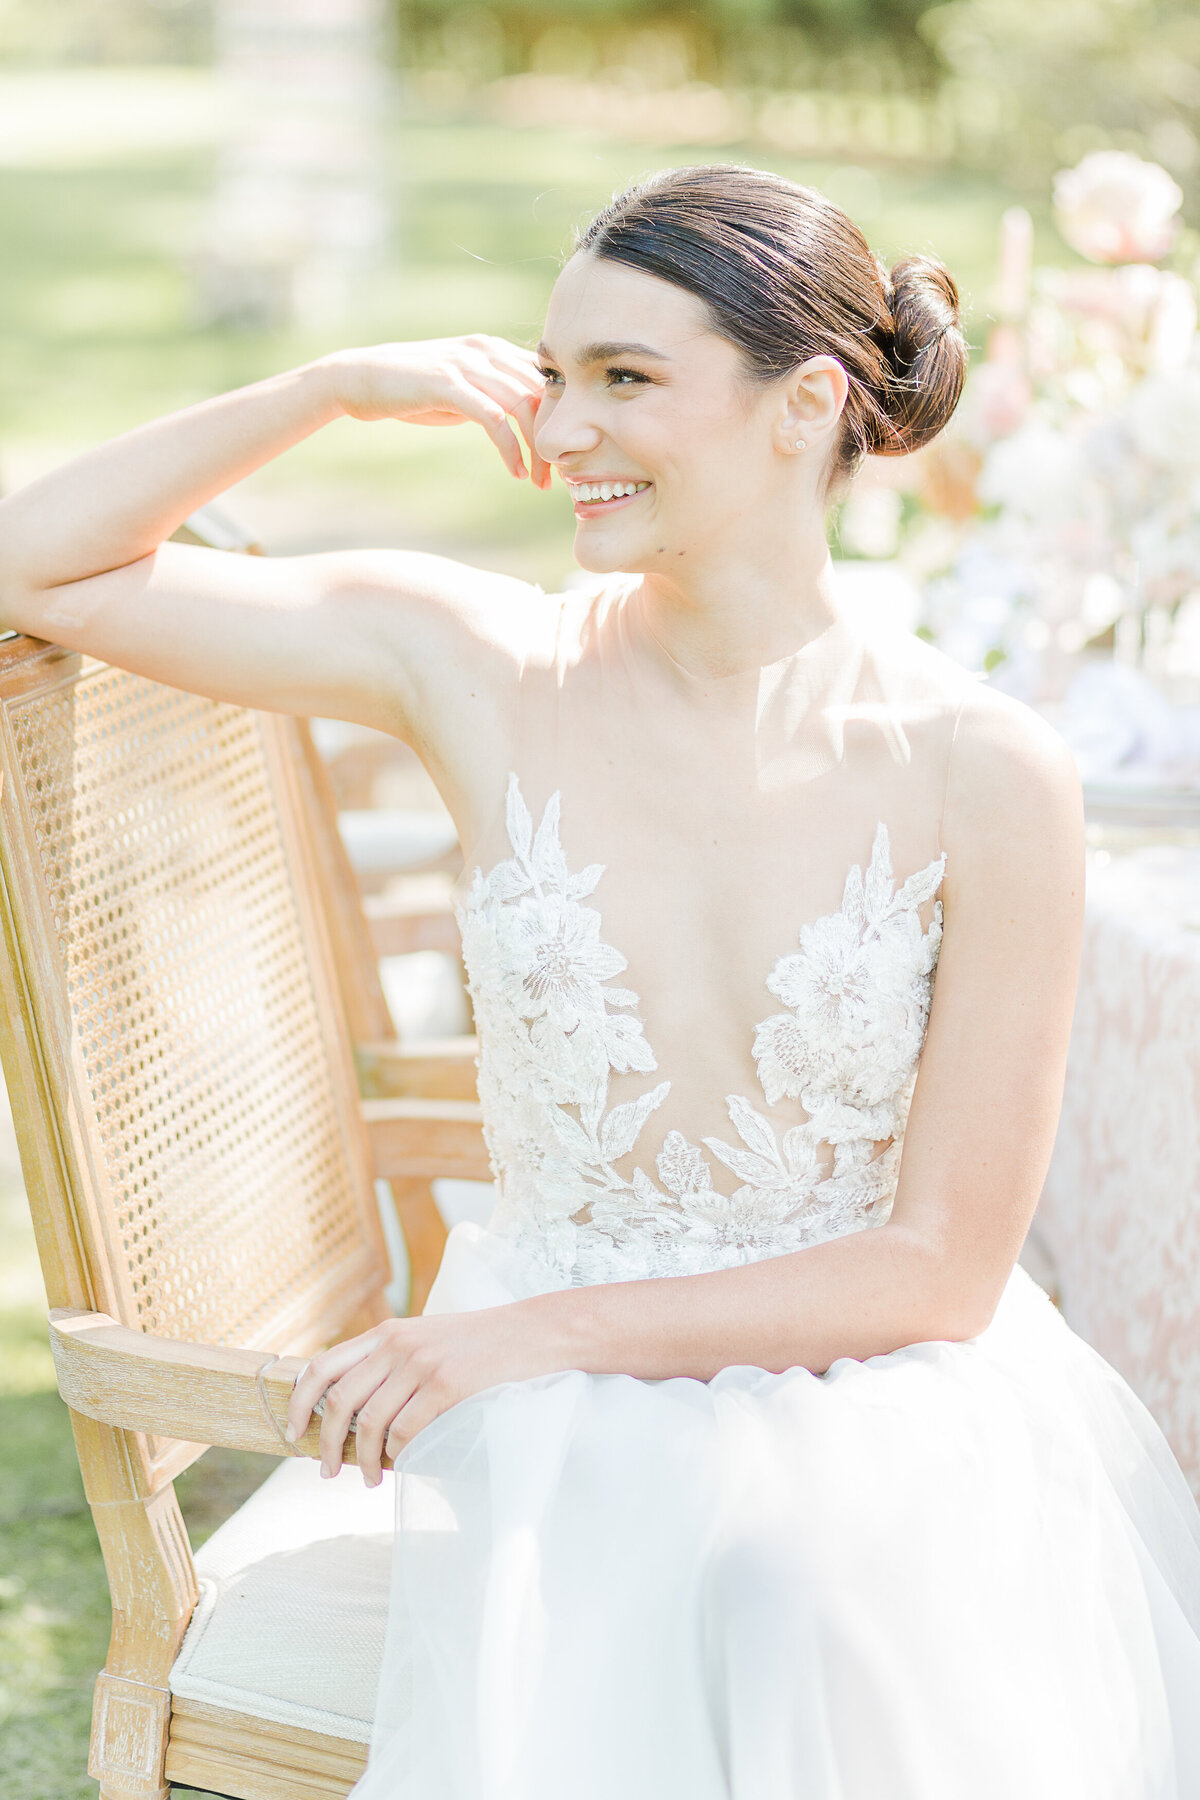 Bride sits in a chair for a casual wedding day portrait. She is looking over her shoulder and off in the distance. Captured by top Rhode Island Wedding Photographer Lia Rose Weddings.